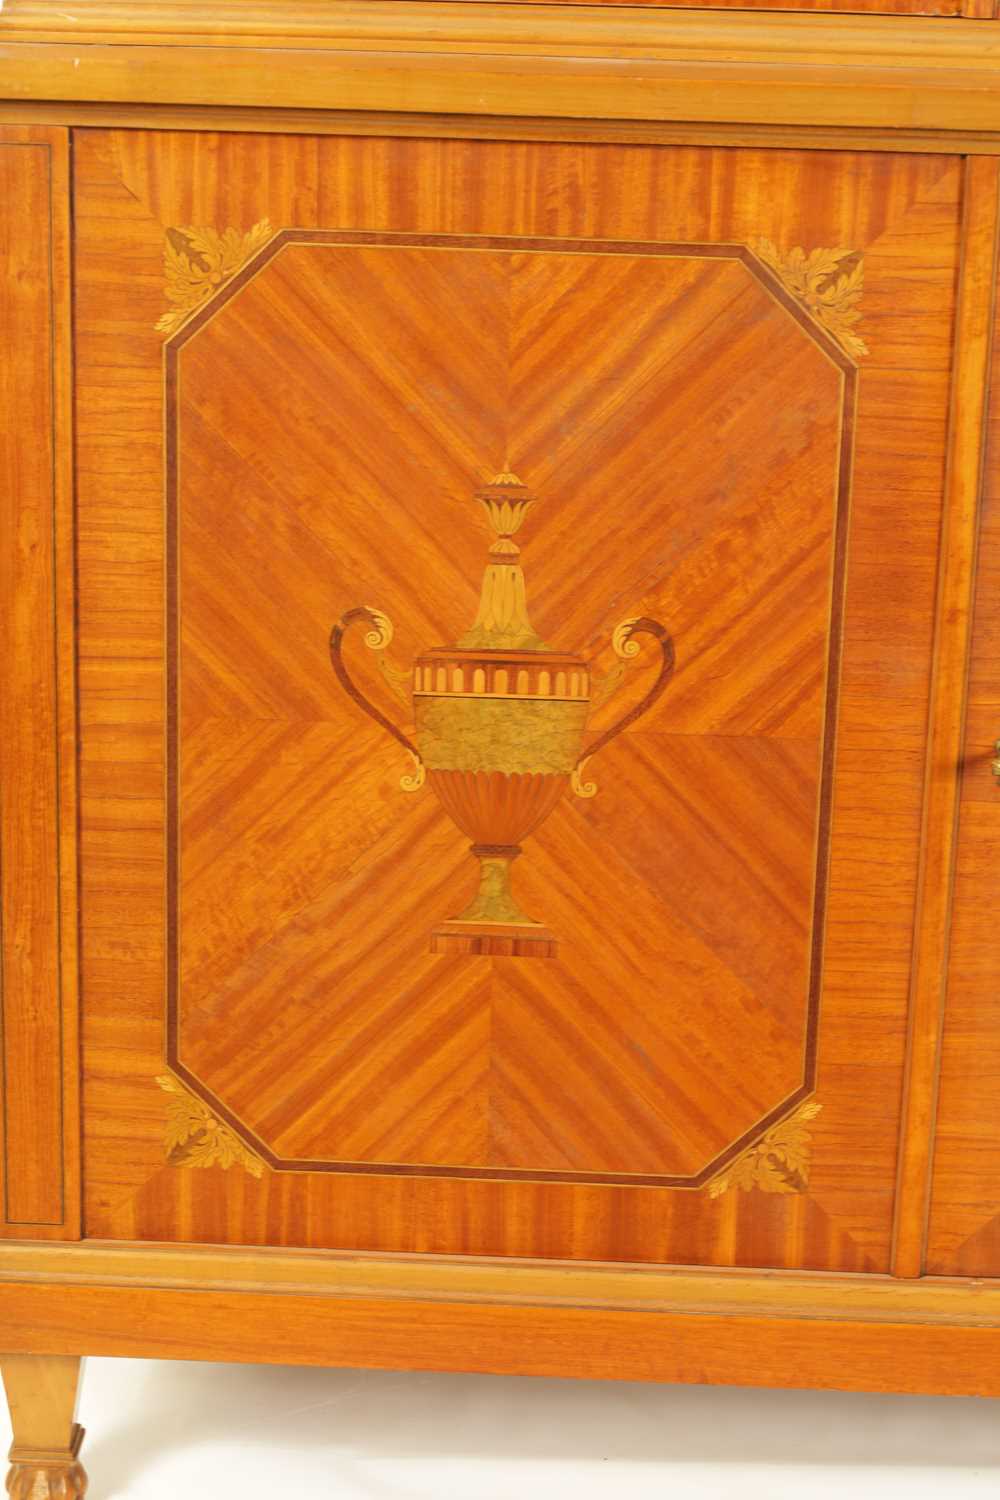 MAPLE & CO. A PAIR OF EDWARDIAN FIGURED SATINWOOD AND MARQUETRY INLAID GLAZED BOOKCASES - Image 4 of 10